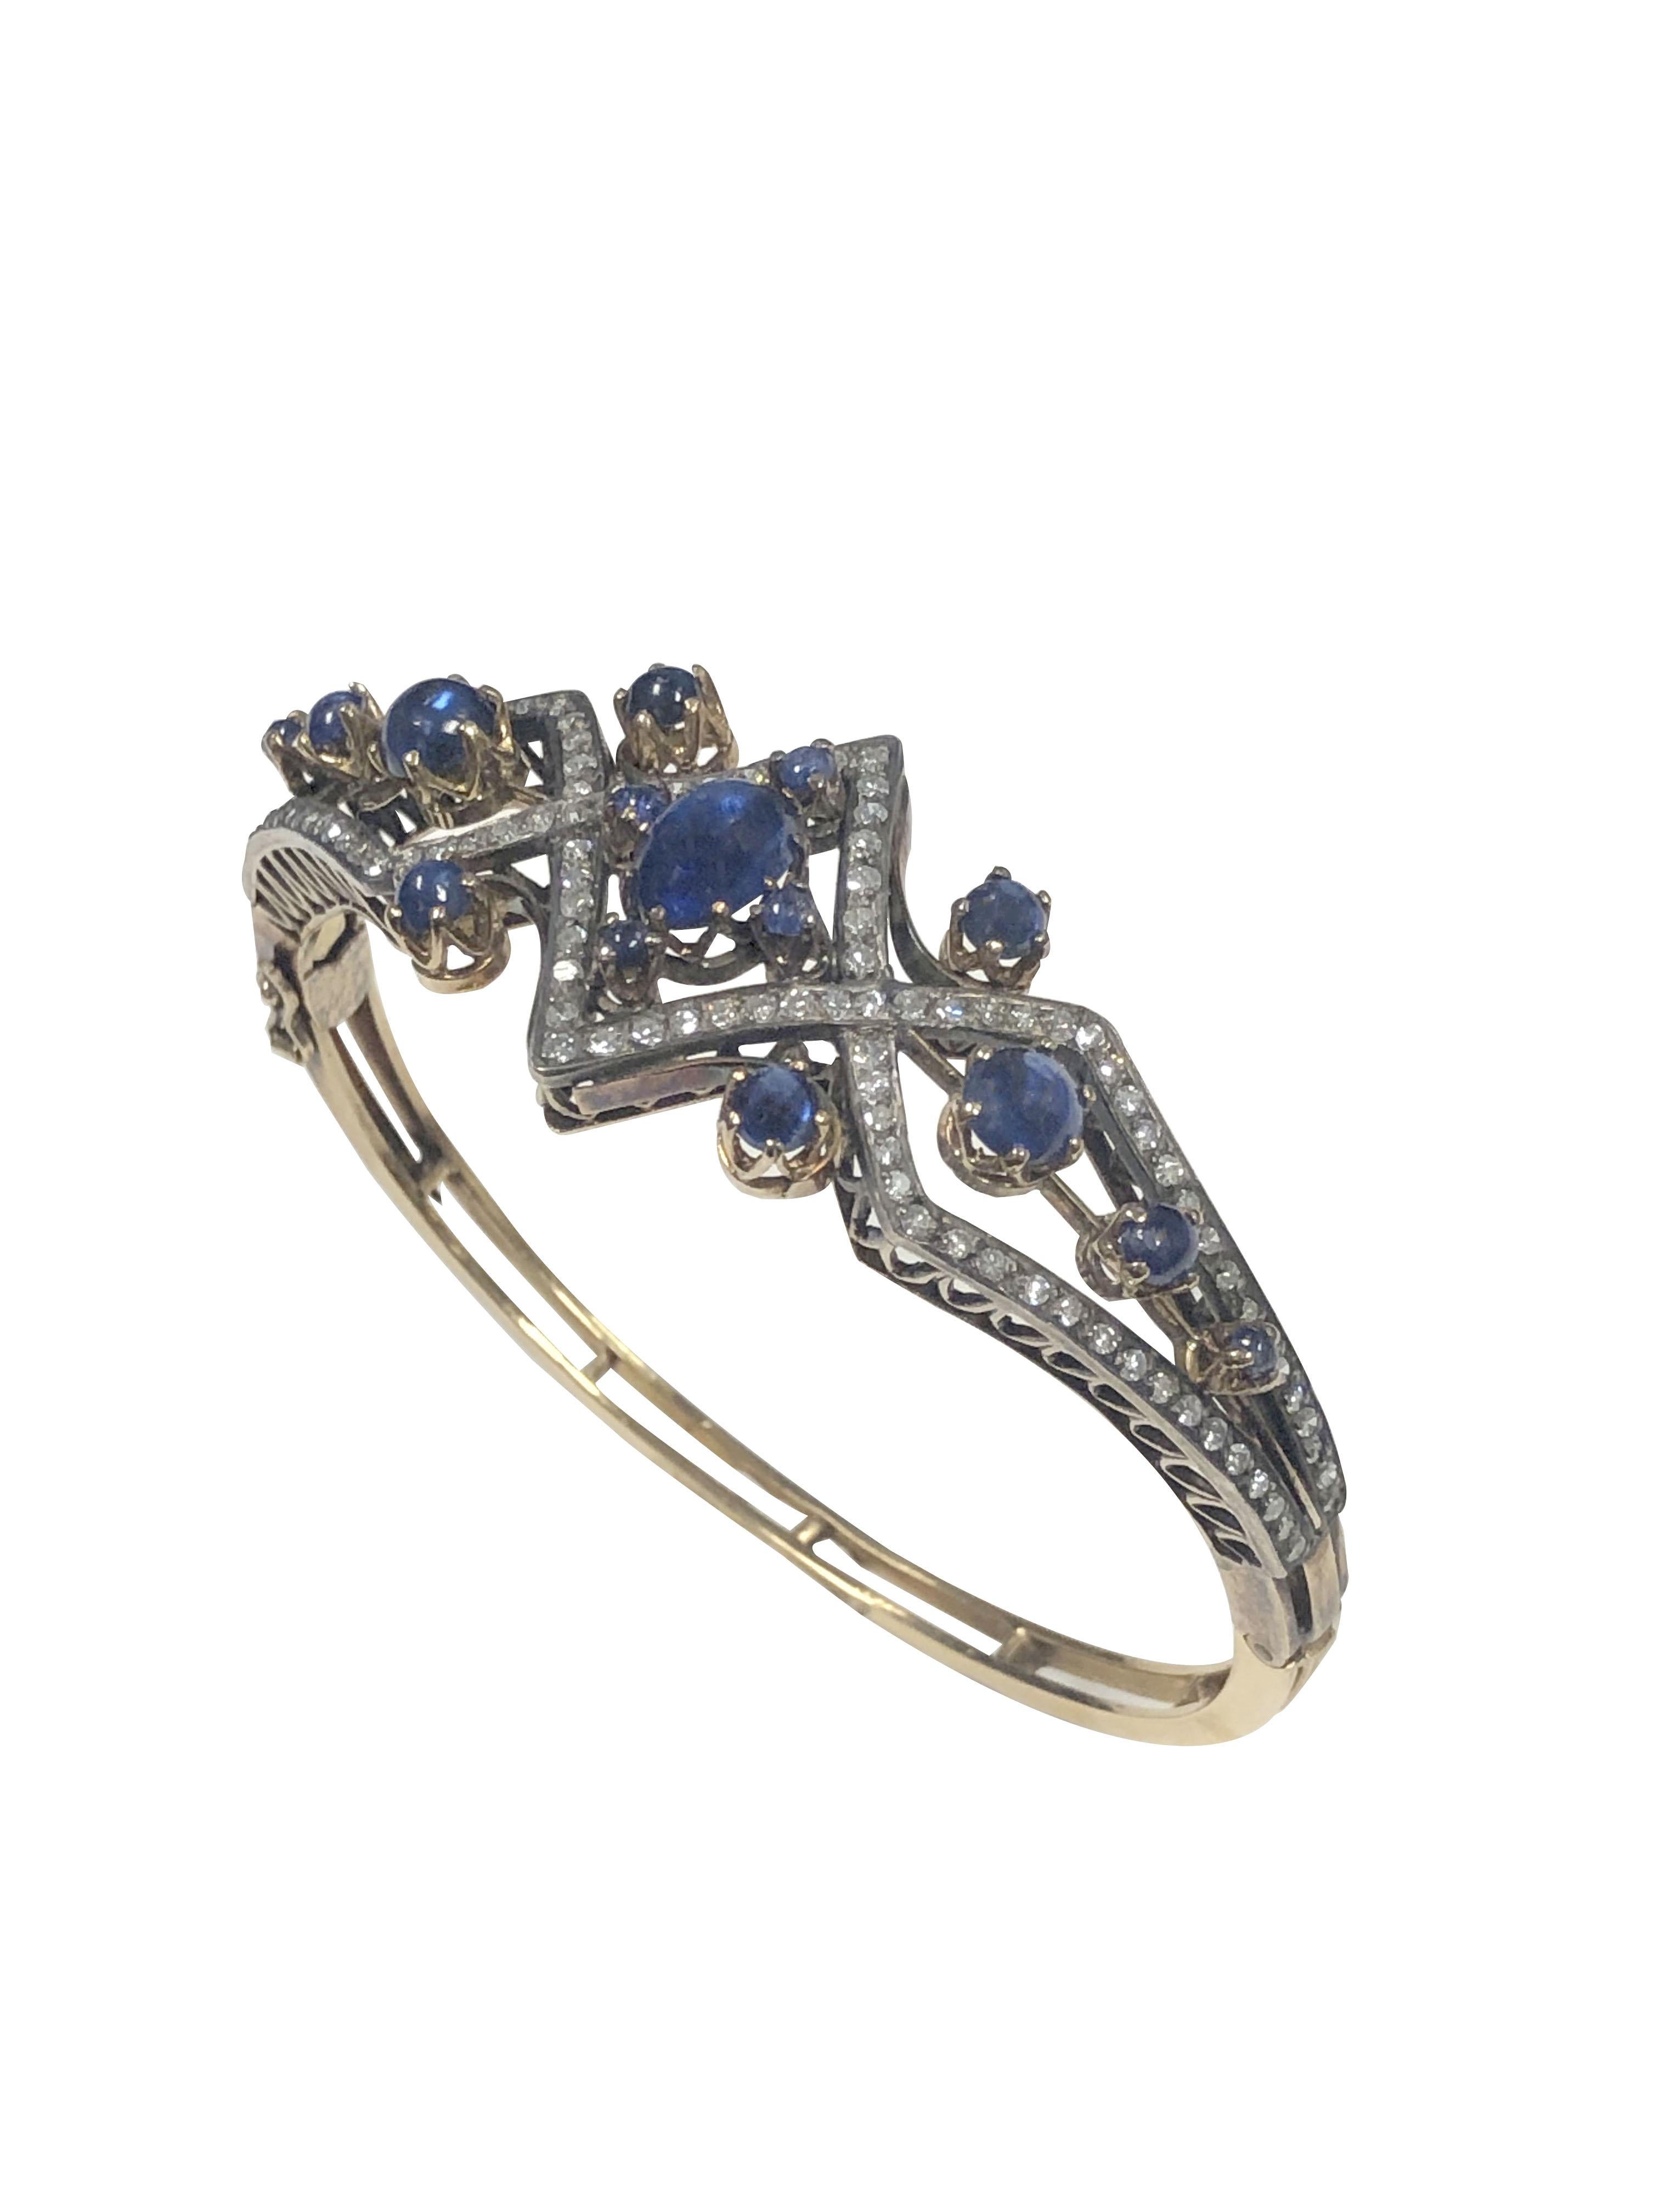 Victorian Diamond Sapphire Silver Top Gold Bangle Bracelet In Excellent Condition For Sale In Chicago, IL